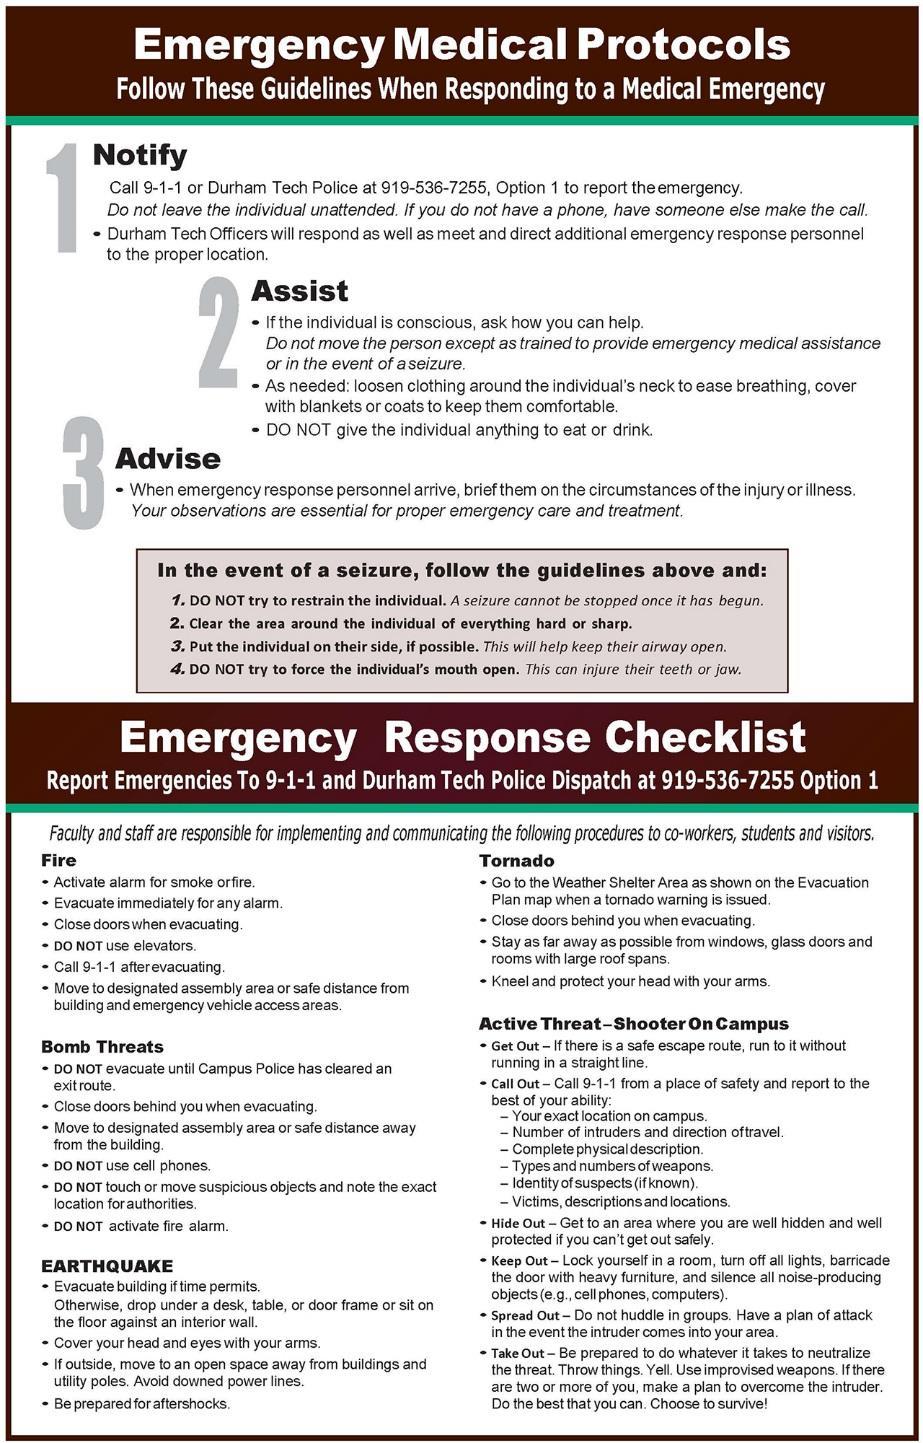 Medical Protocols and Emergency Response Checklist Phone numbers to call in an emergency. Basics of what to do in emergency situations.